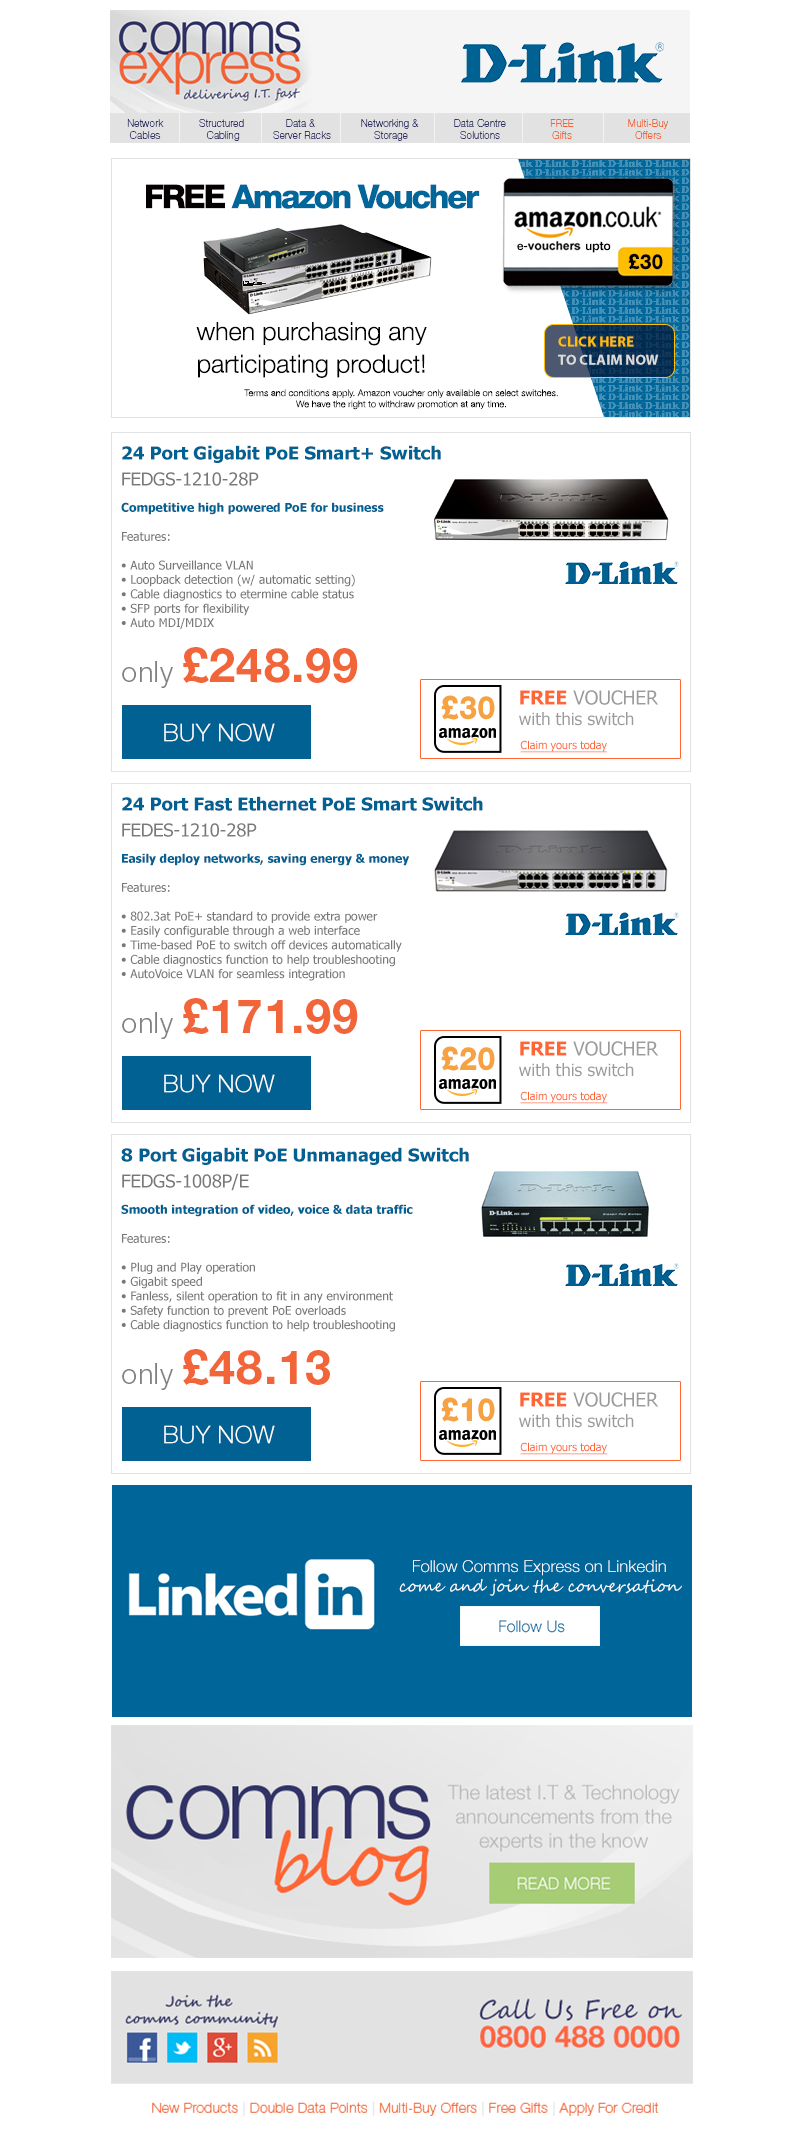 FREE Amazon voucher with select DLink switches